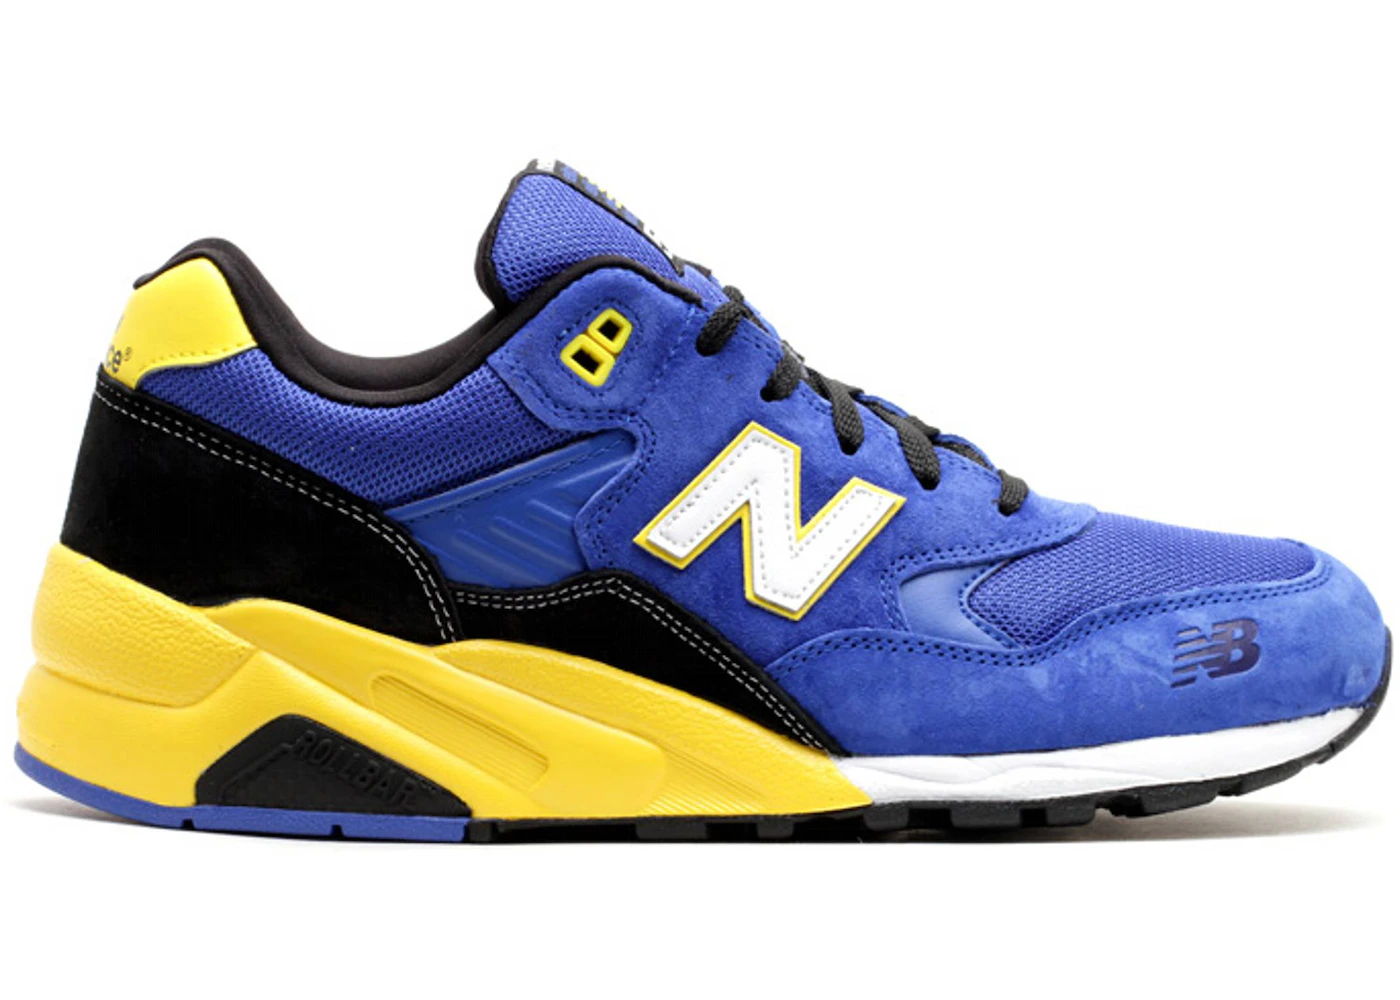 New Balance MT580 Racing Pack Men's - MT580BY - US